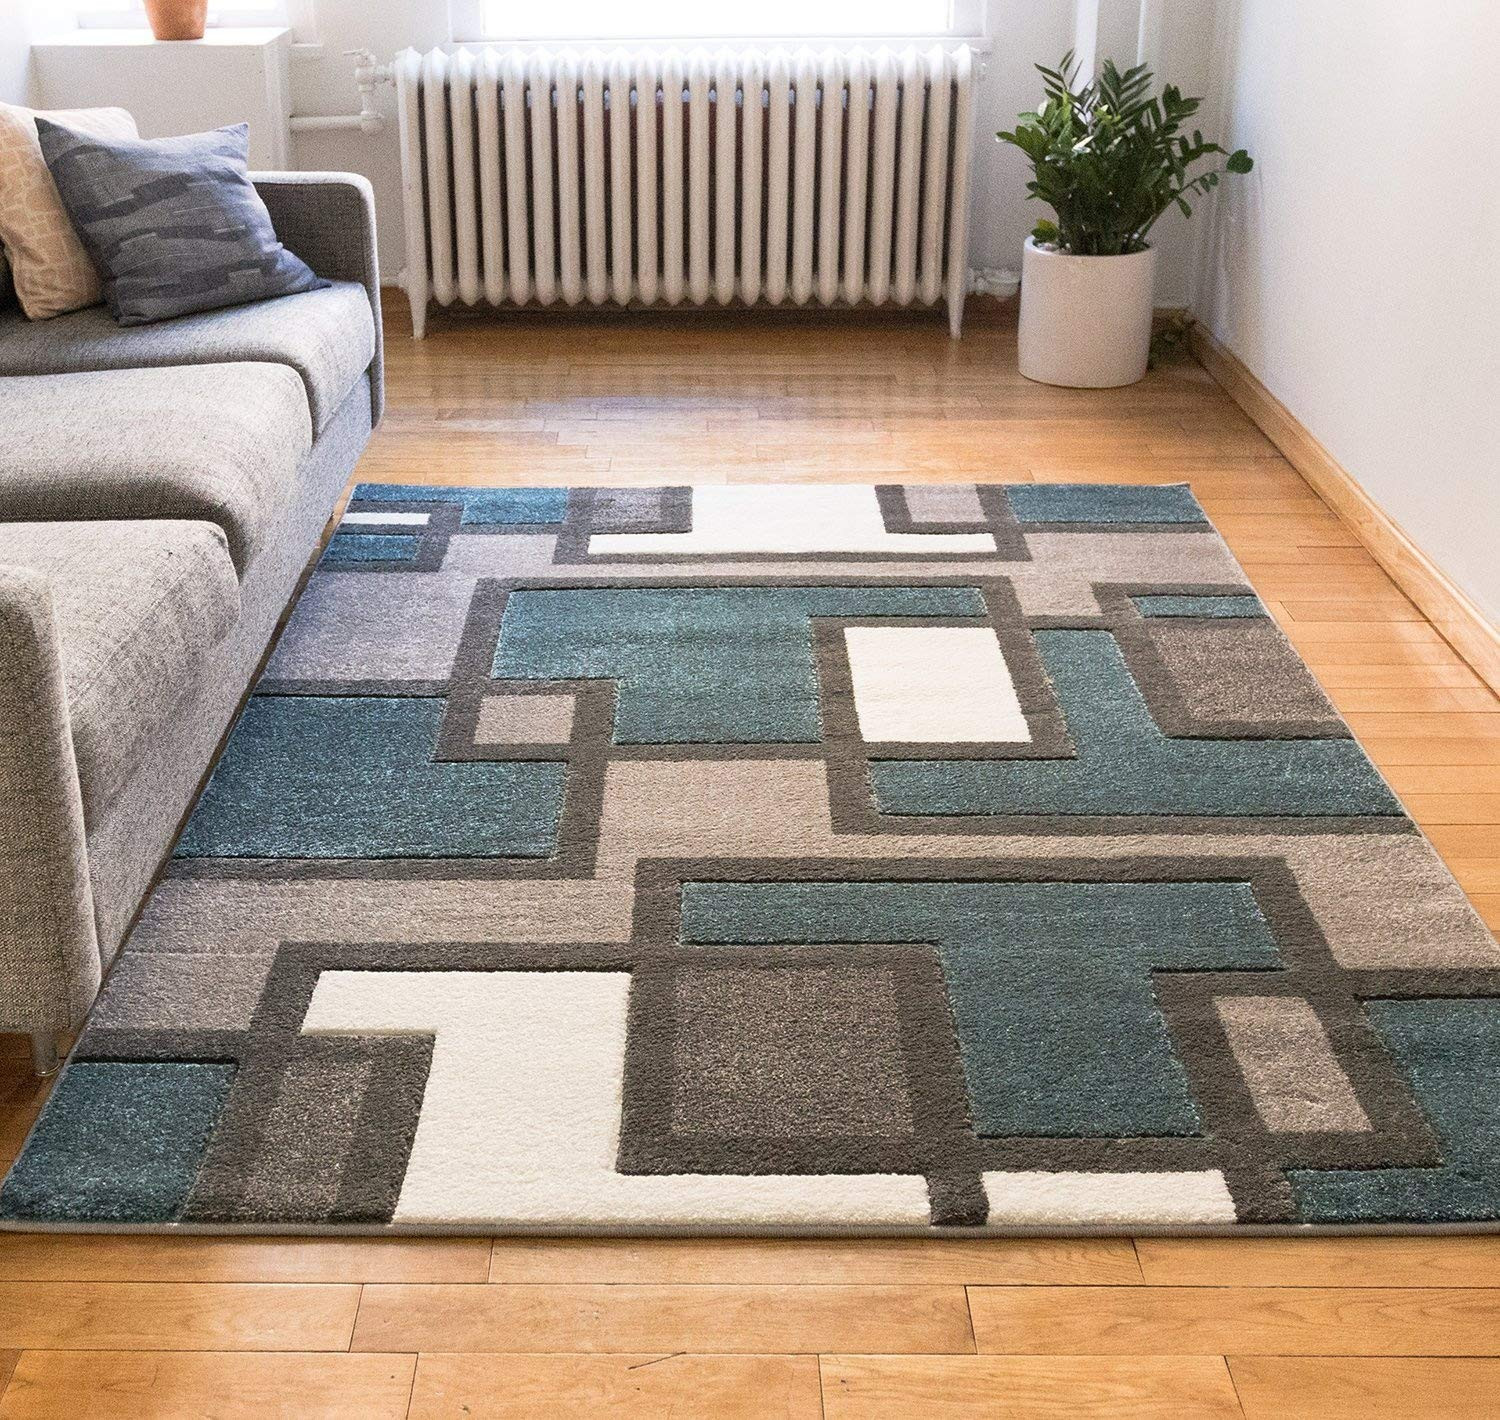 Brown Living Room Rugs
 Accent Rug for Living Room Amazon